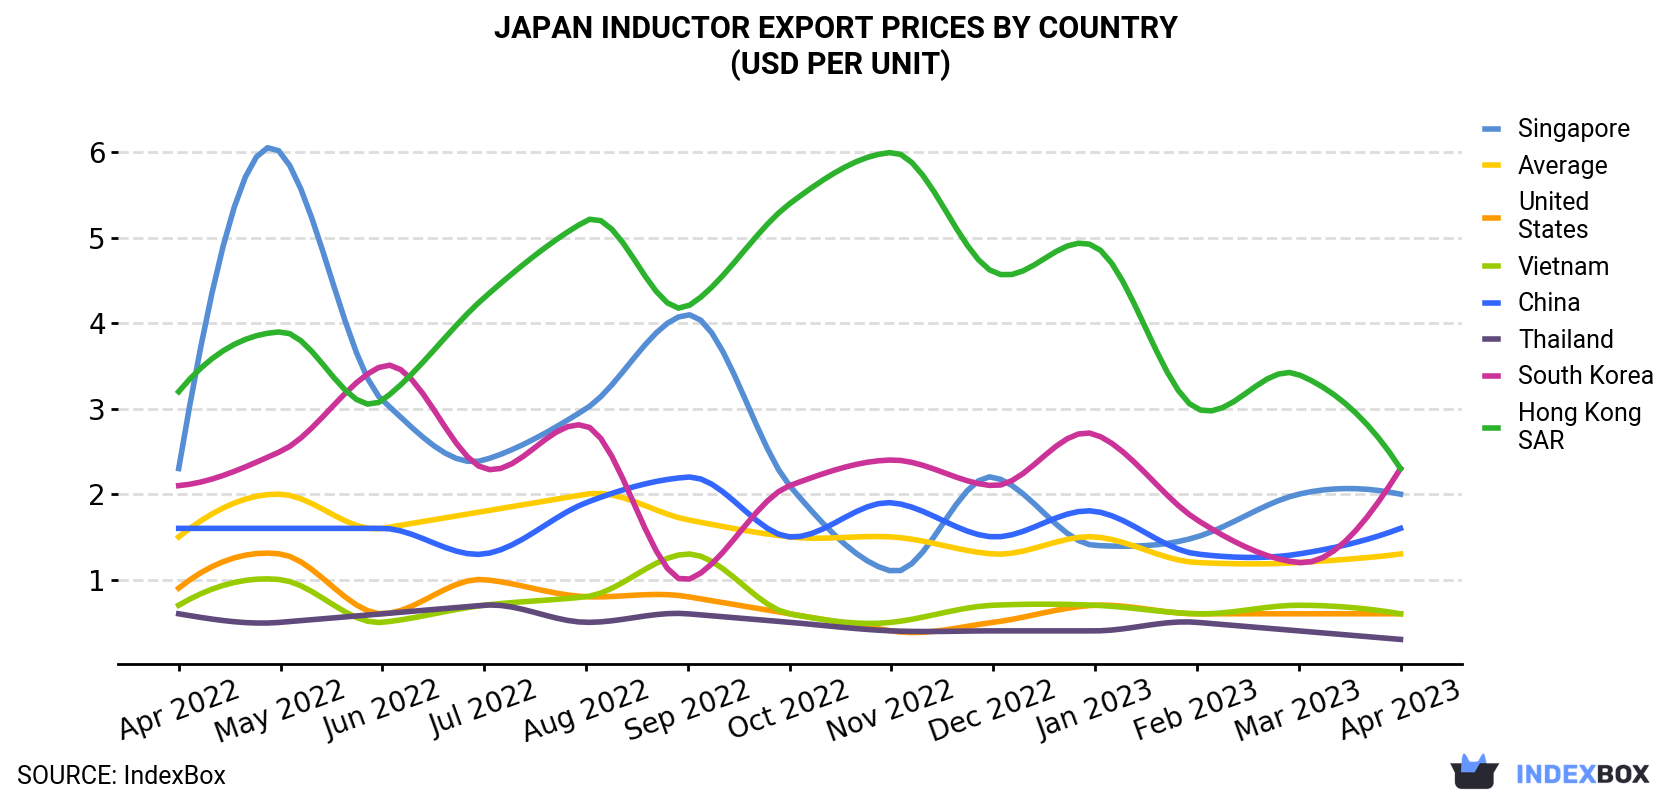 Japan Inductor Export Prices By Country (USD Per Unit)